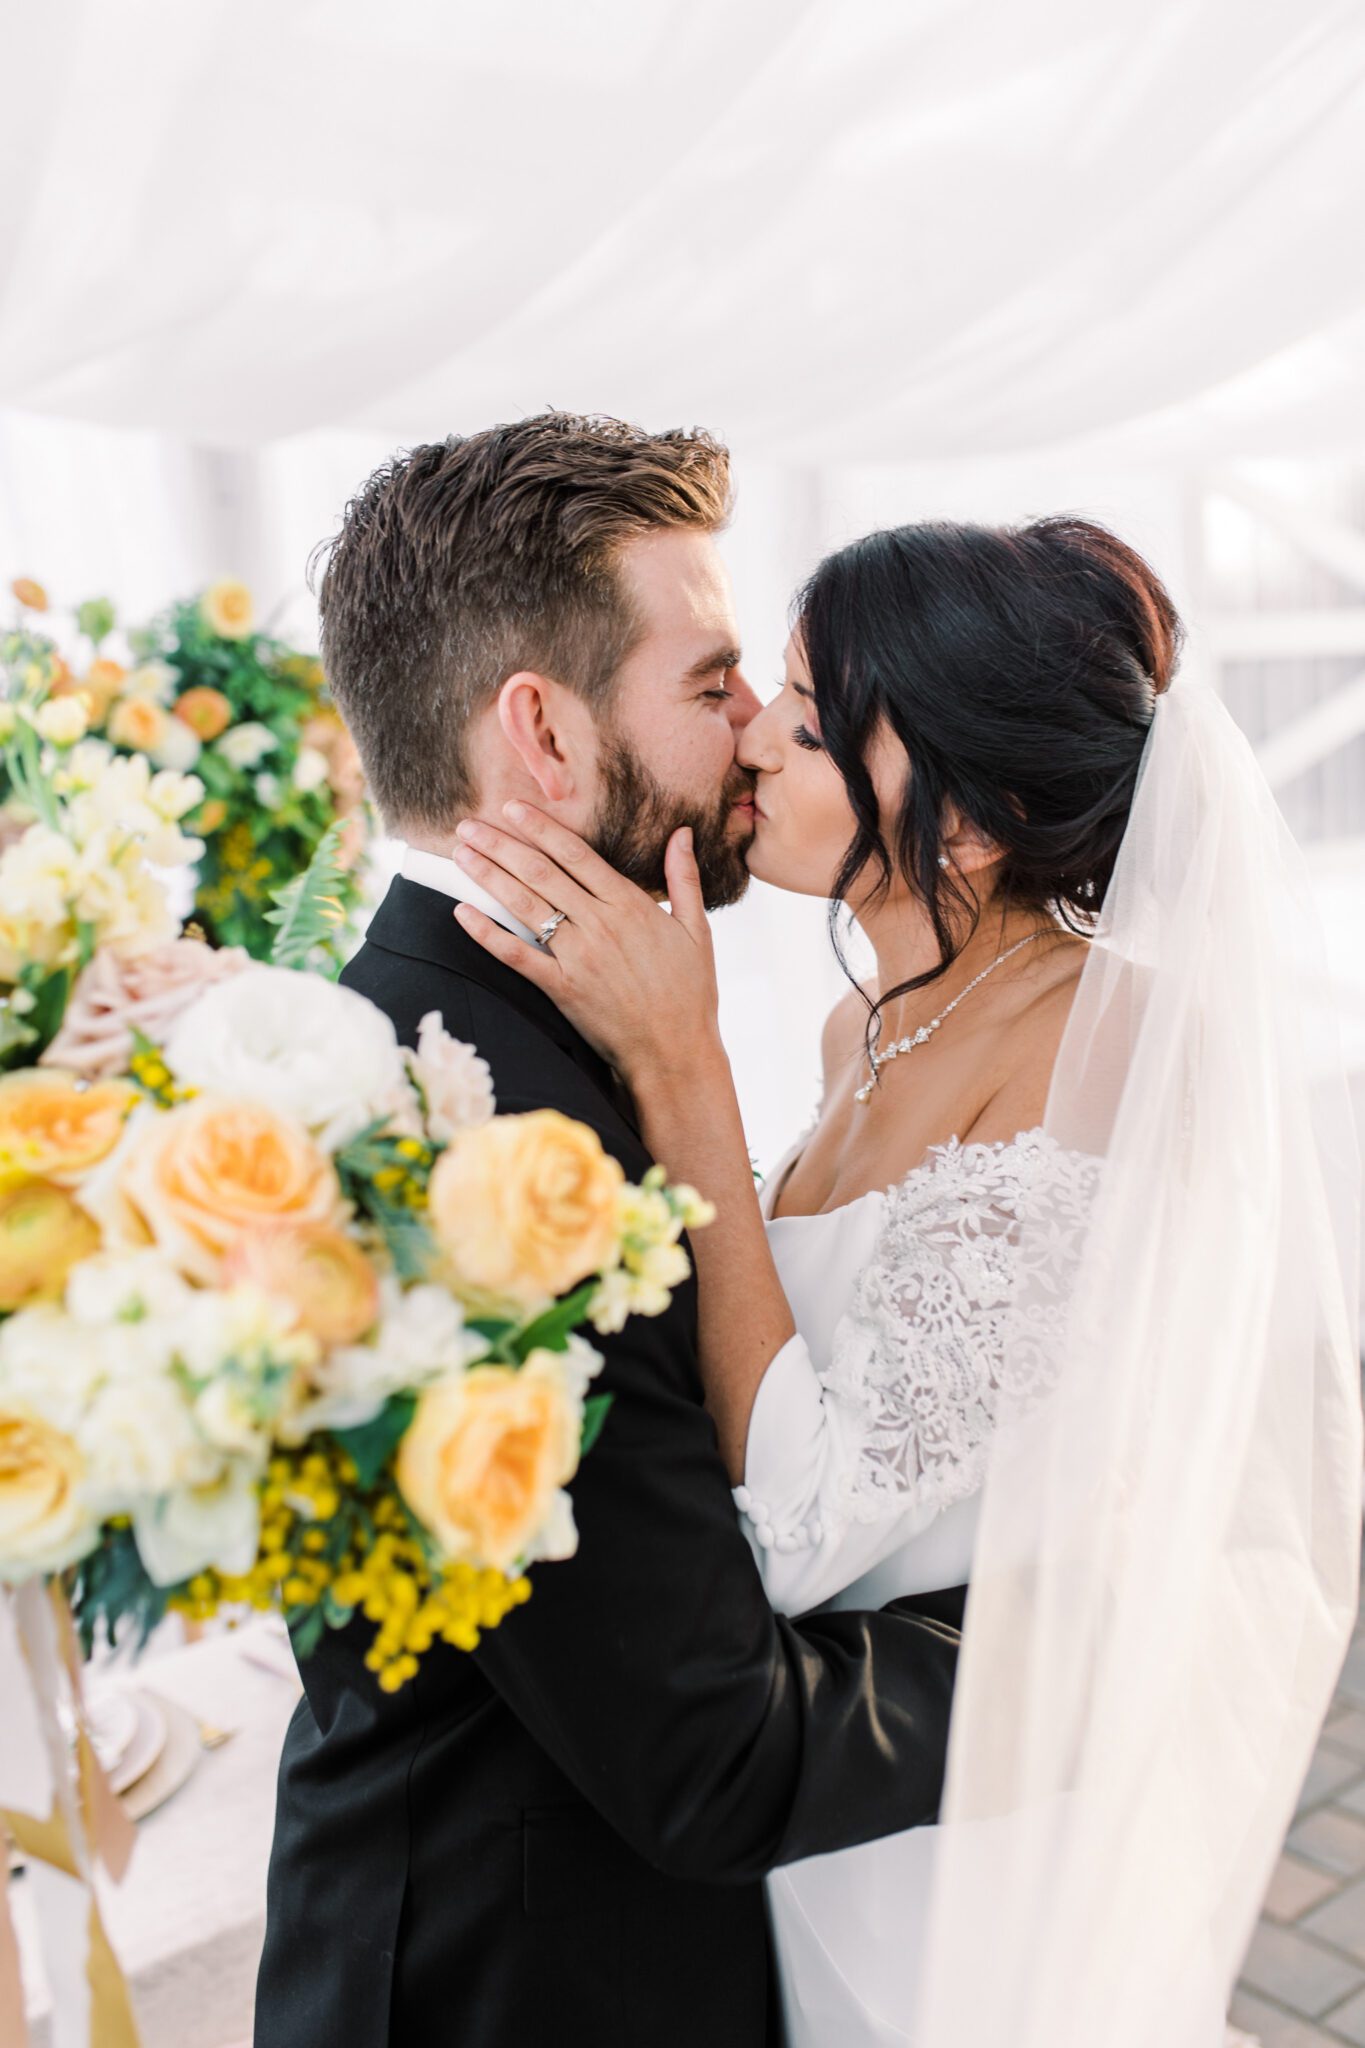 Bride and groom kissing at stunning tented wedding, featuring yellow and peach spring wedding colour palette. Bride wearing classic off-the-shoulder wedding gown with lace sleeve detail.